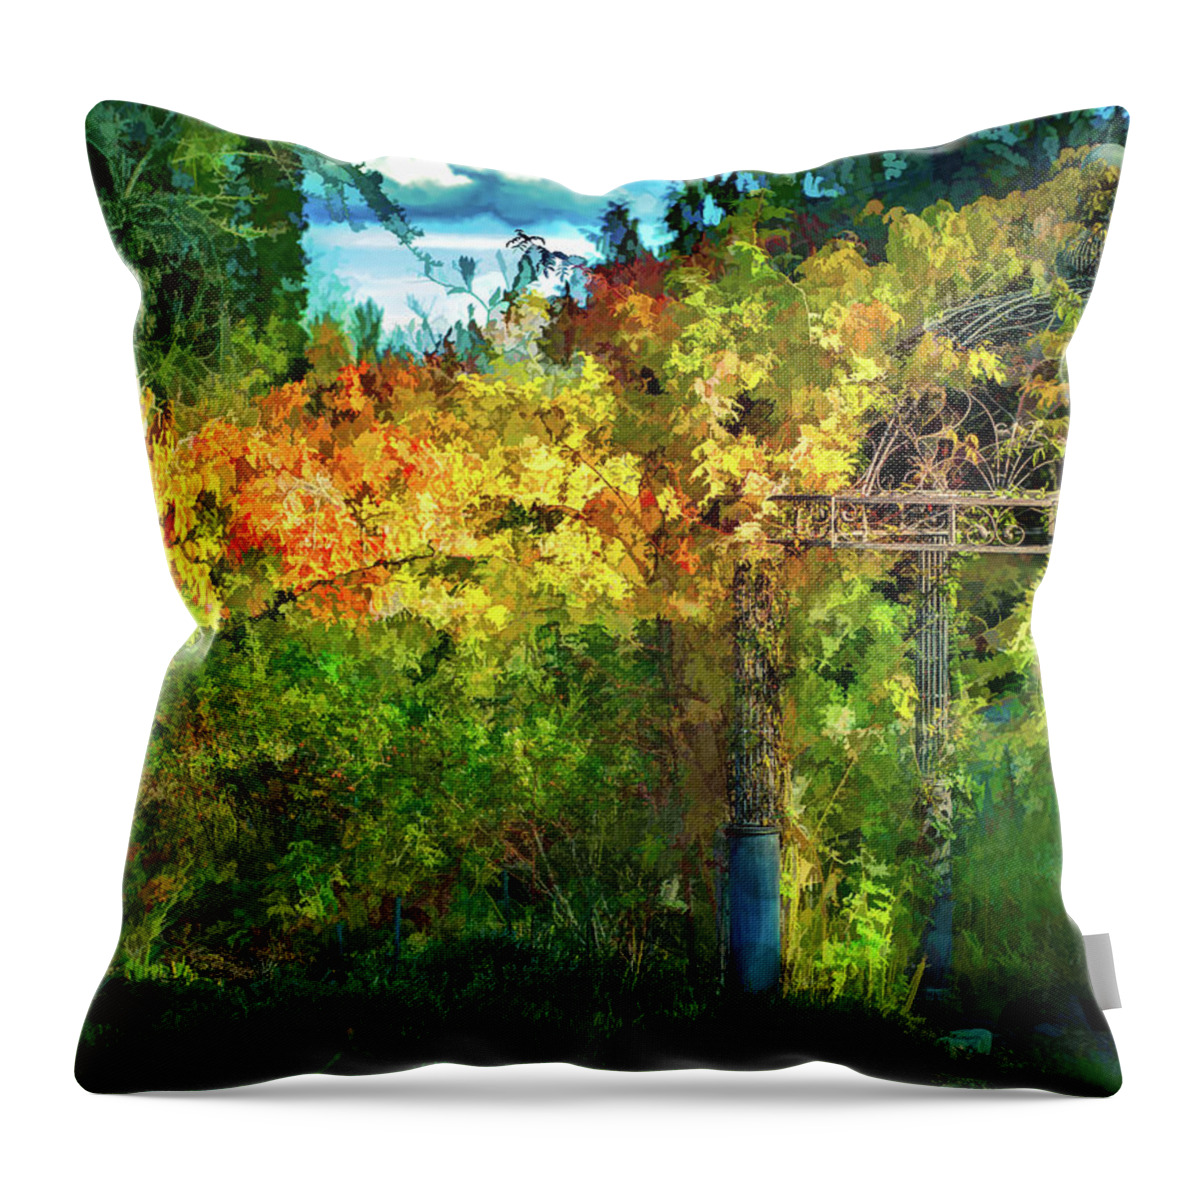 Soos Creek Botanical Garden In The Fall Throw Pillow featuring the painting Soos Creek Fall Color 8 by Mike Penney